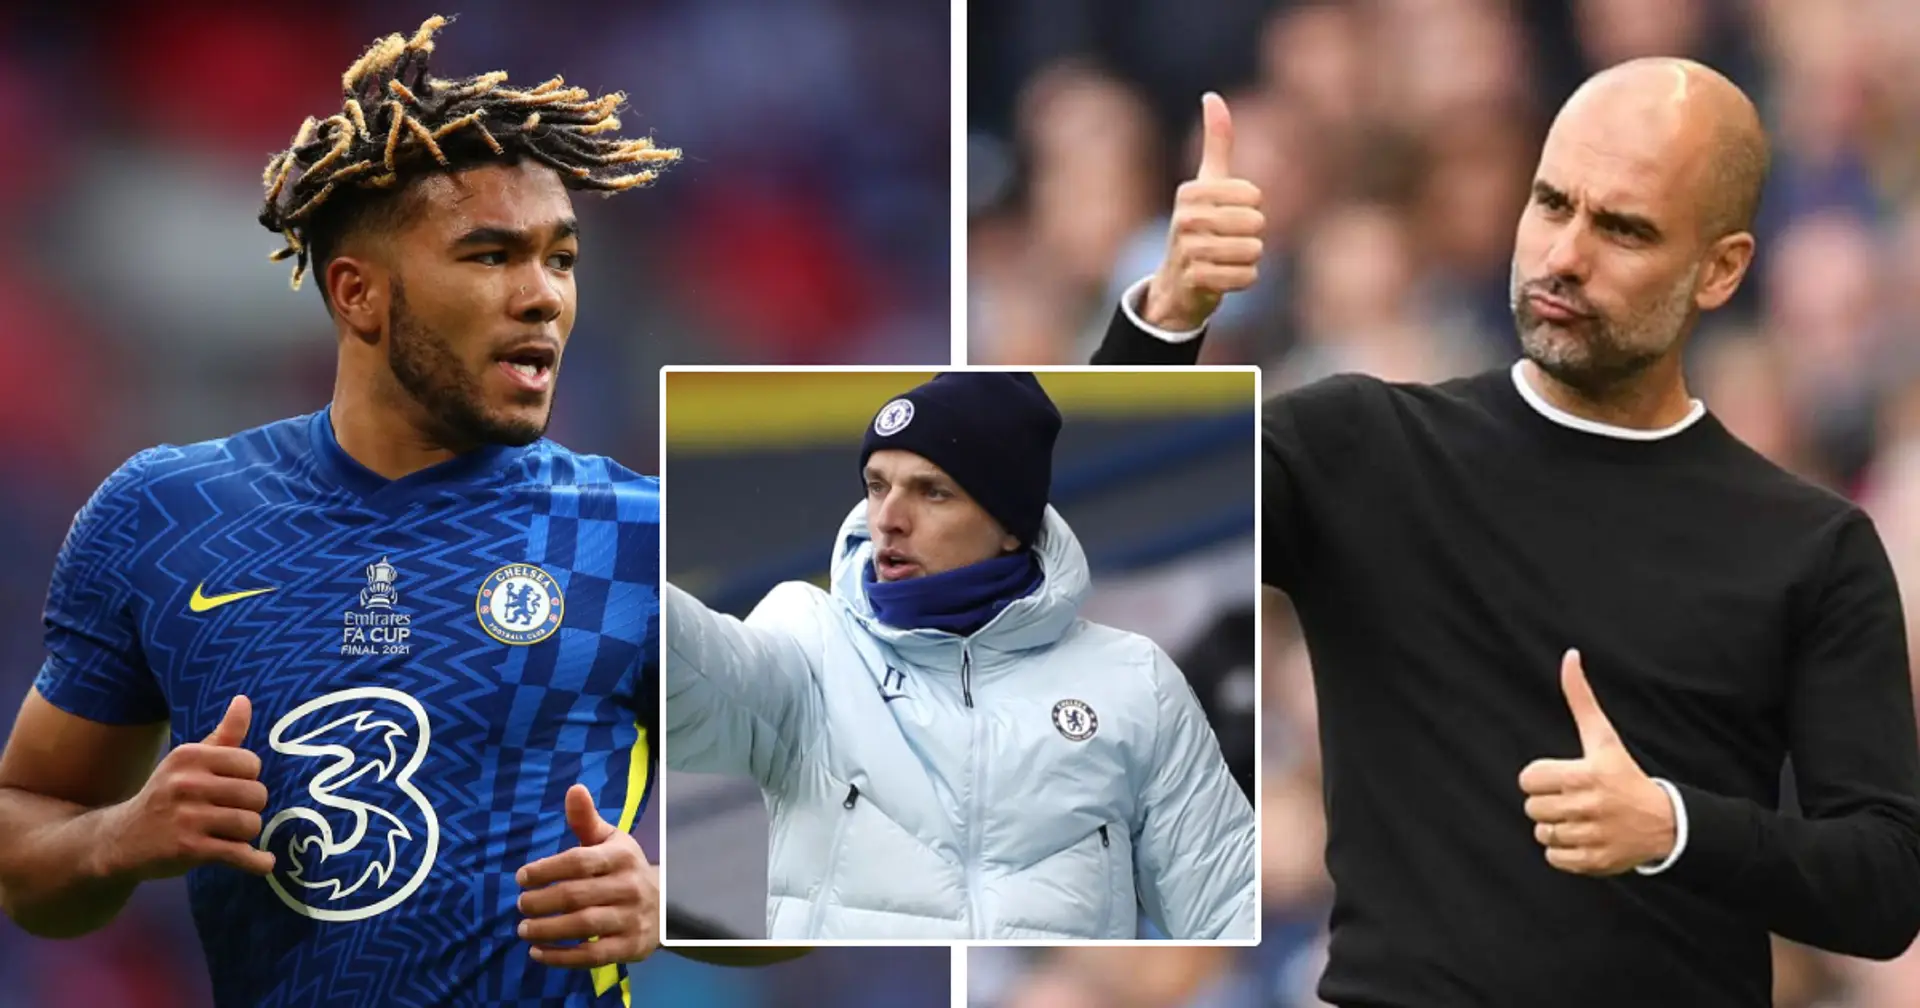 Man City targeting one of Chelsea's lowest earners Reece James, Guardiola huge fan: The Athletic (reliability: 5 stars)